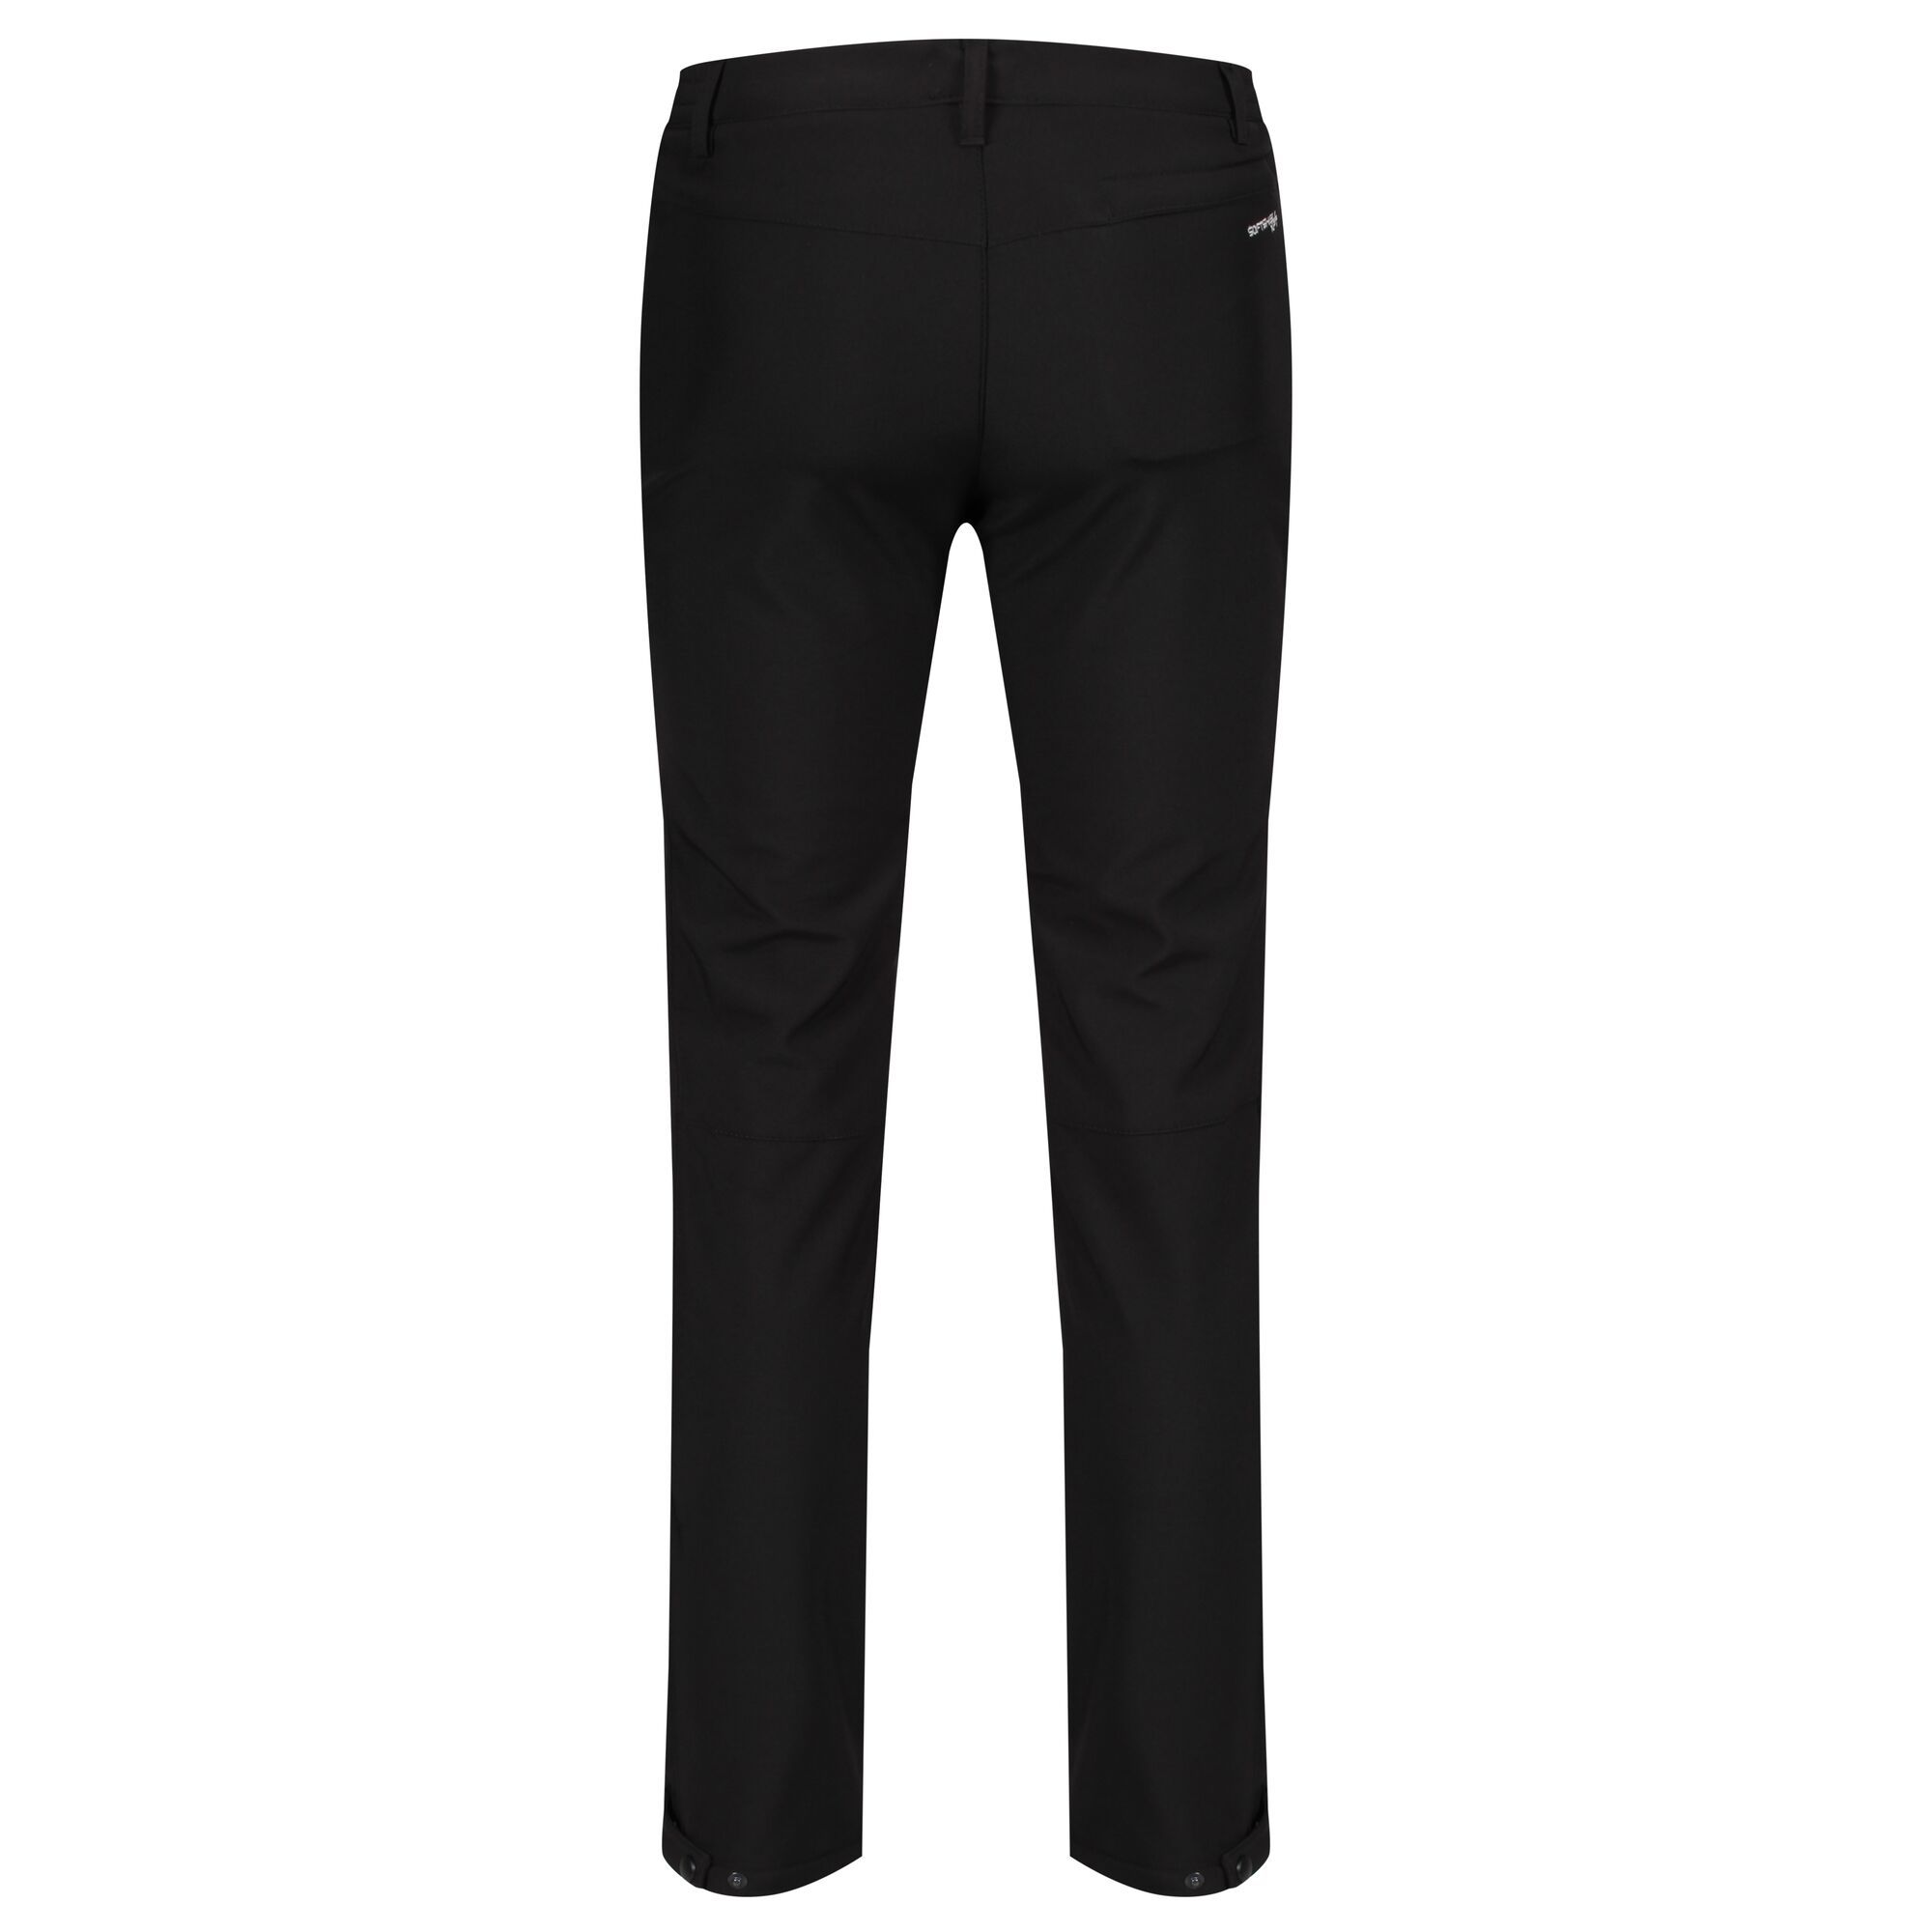 The mens Geo Softshell XPT II Trousers use a breathable, wind resistant membrane with a DWR (Durable Water Repellent) finish for maximum comfort on demanding days. They stave off showers and gales and keep you warm while allowing superb mobility. Packed with handy pockets and part elastic at the waist for comfort as you move, they have proven to be best-selling performance trousers year-on-year. 94% Polyester, 6% Elastane. Regatta Mens sizing (waist approx): 26in/66cm, 28in/71cm, 30in/76cm, 32in/81cm, 33in/84cm, 34in/86.5cm, 36in/91.5cm, 38in/96.5cm, 40in/101.5cm, 42in/106.5cm, 44in/111.5cm, 46in/117cm, 48in/122cm, 50in/127cm. Leg Length: Approx 31in.